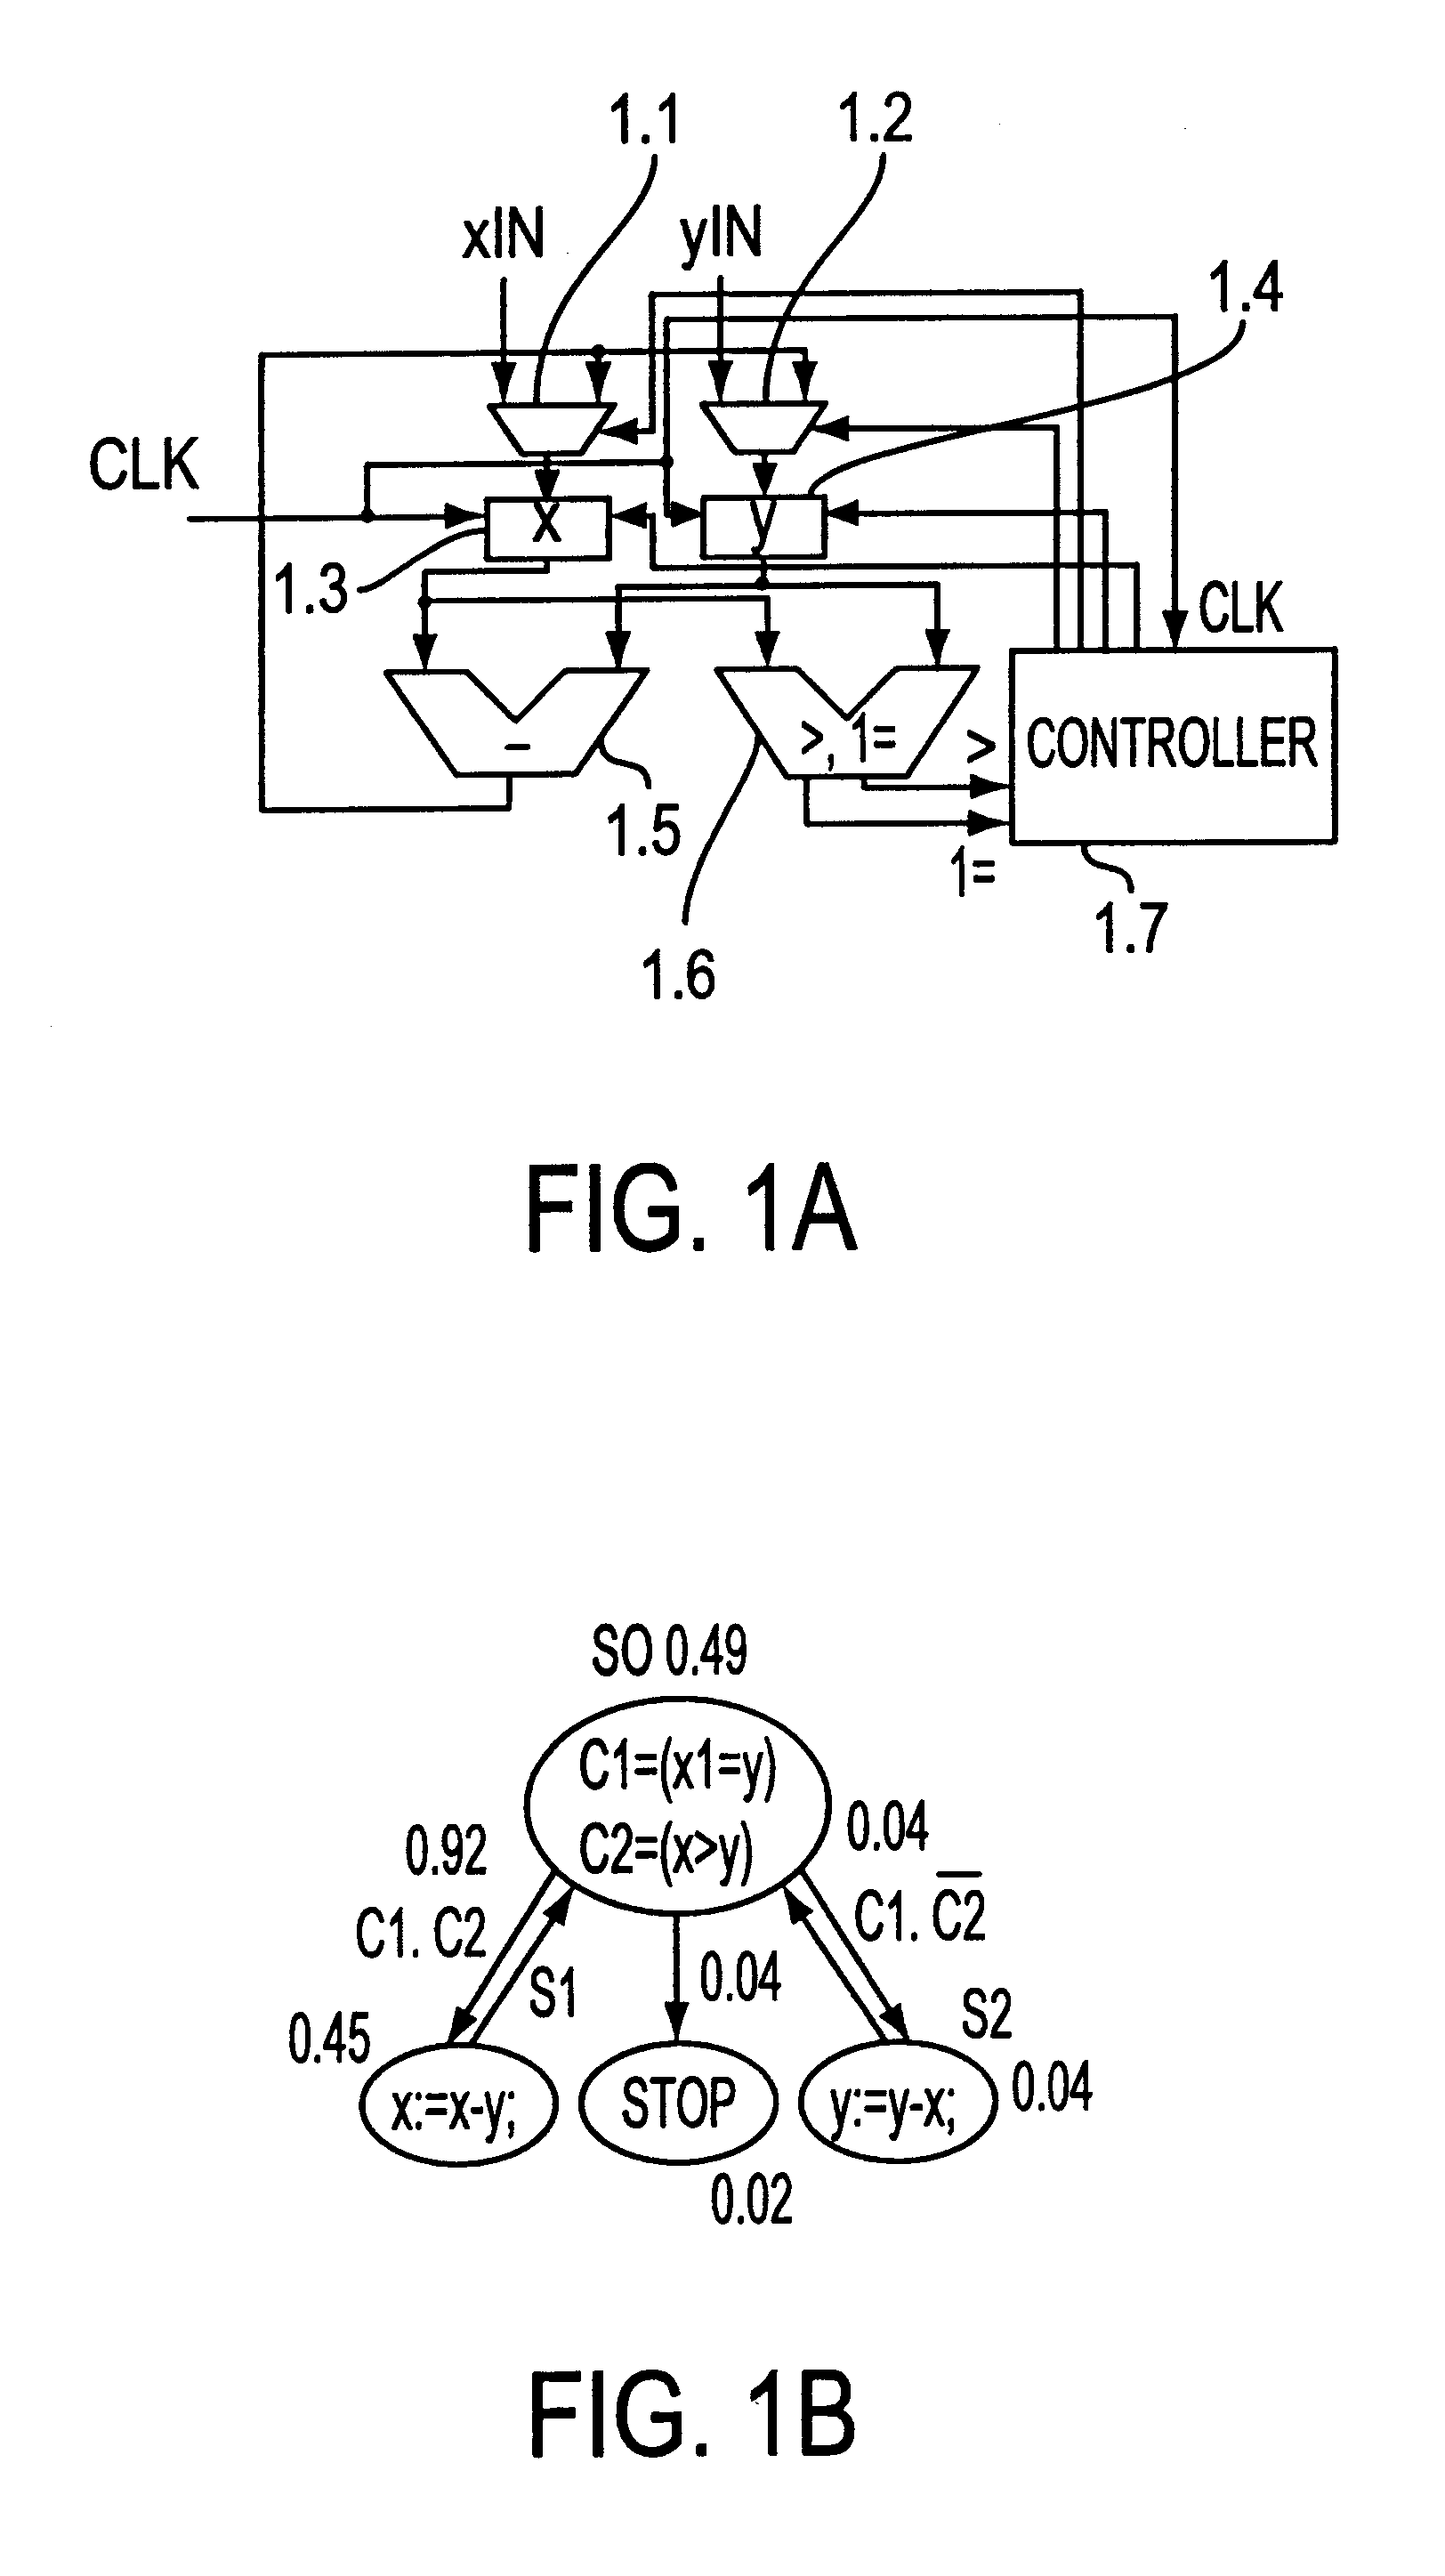 Common case optimized circuit structure for high-performance and low-power VLSI designs